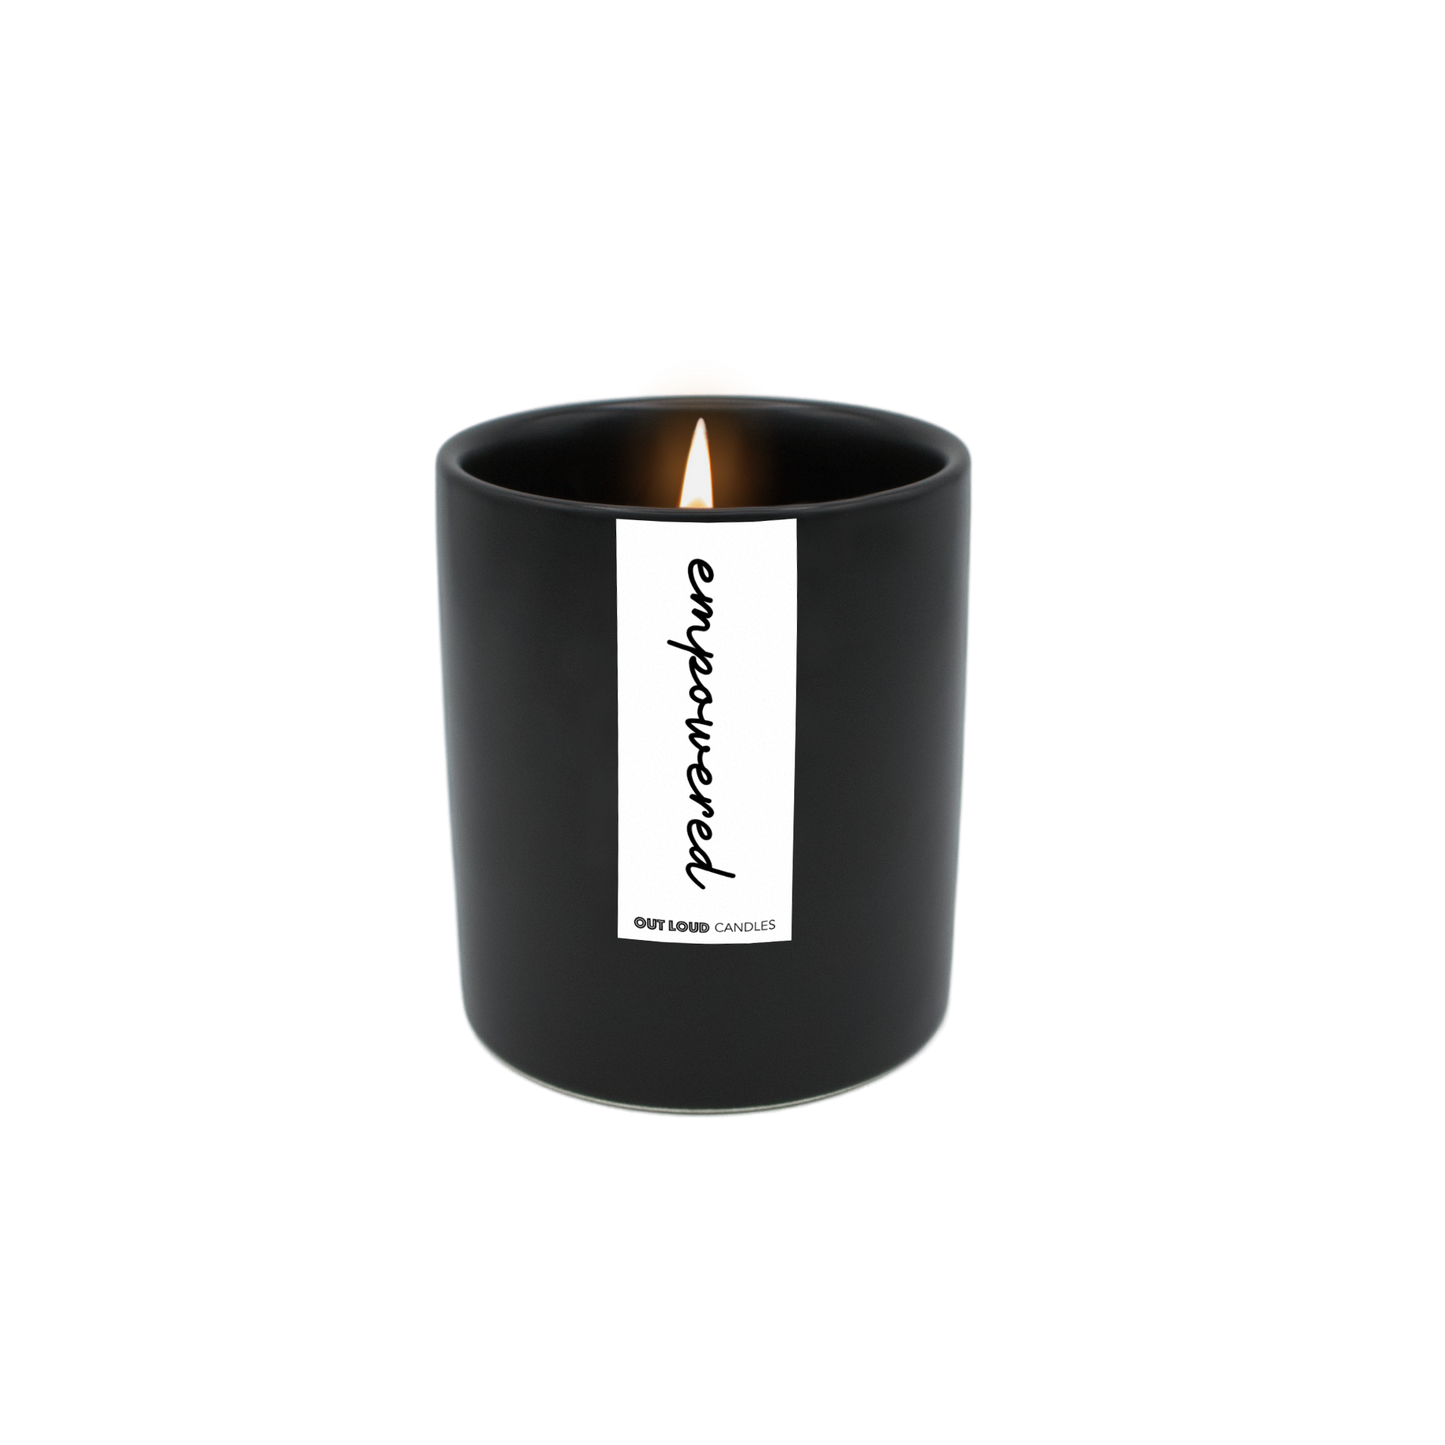 Empowered Glass Candle